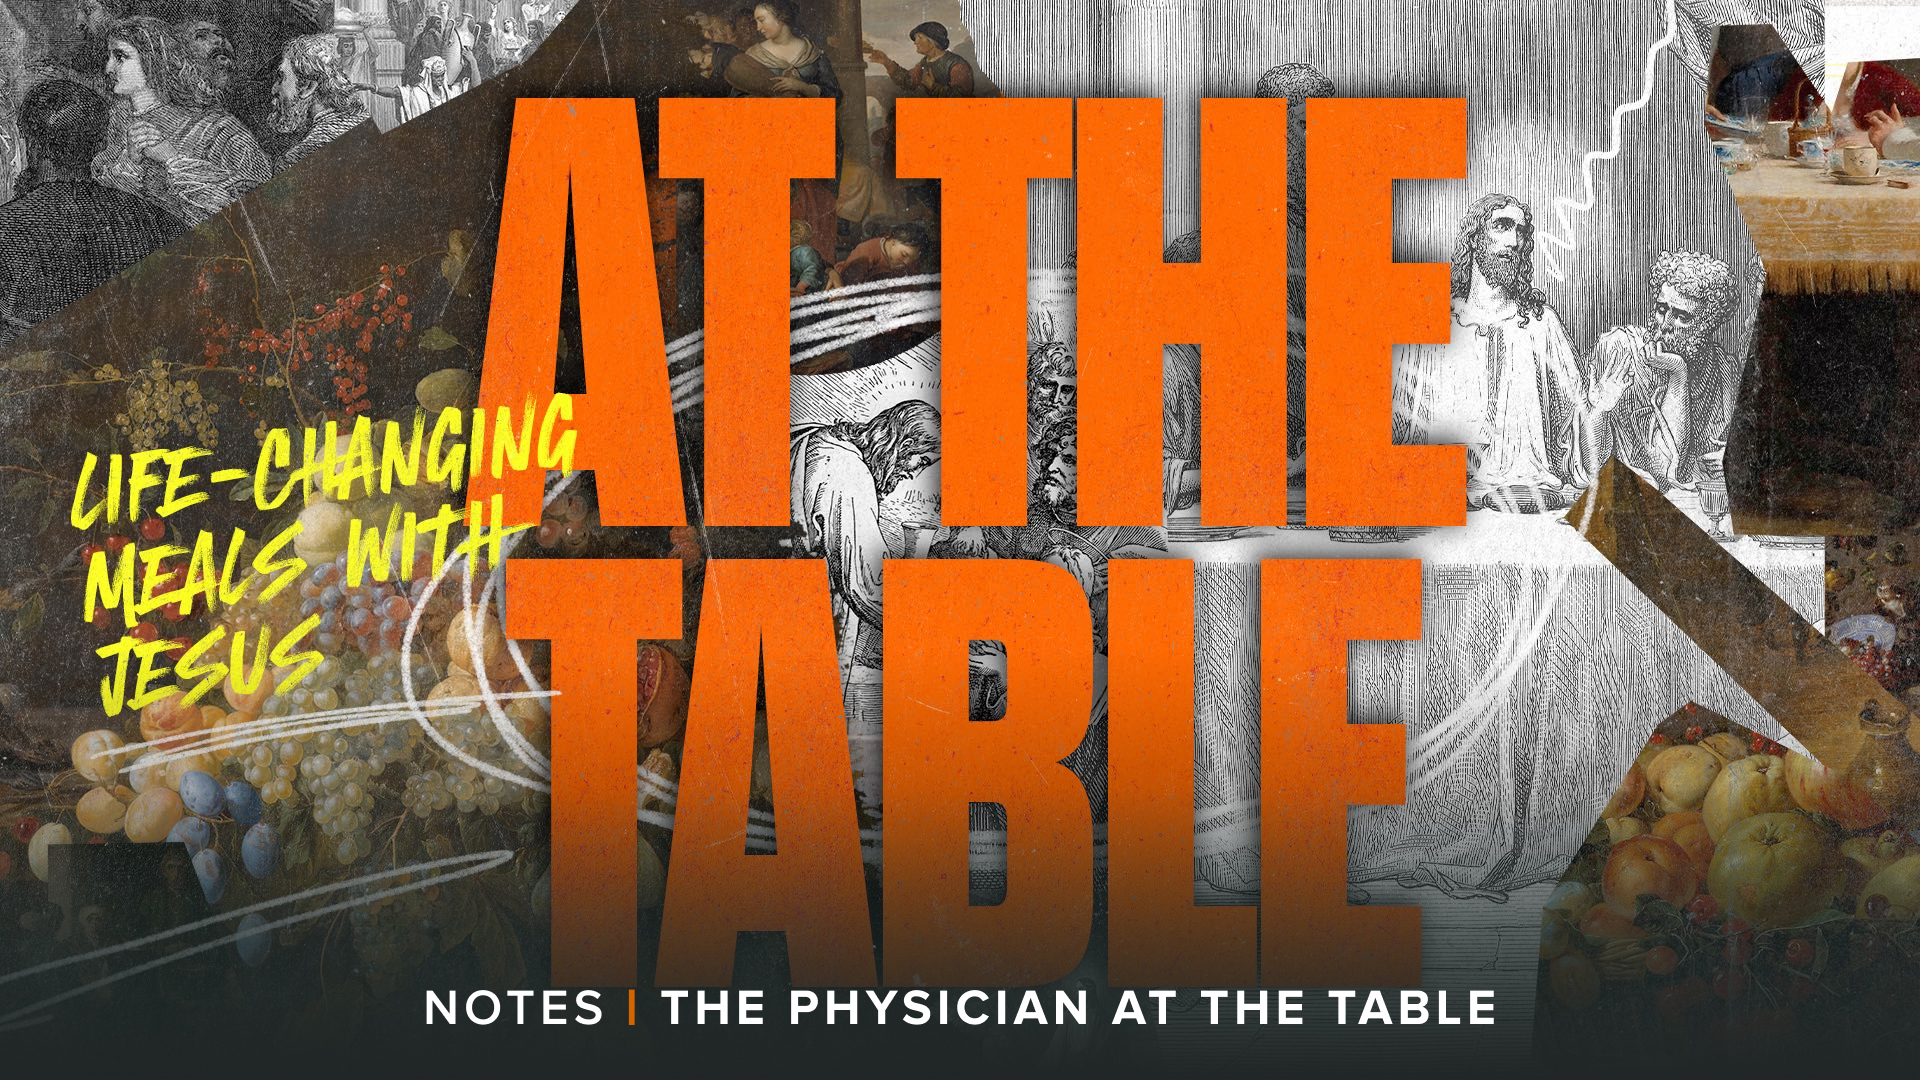 Notes, The Physician at the Table